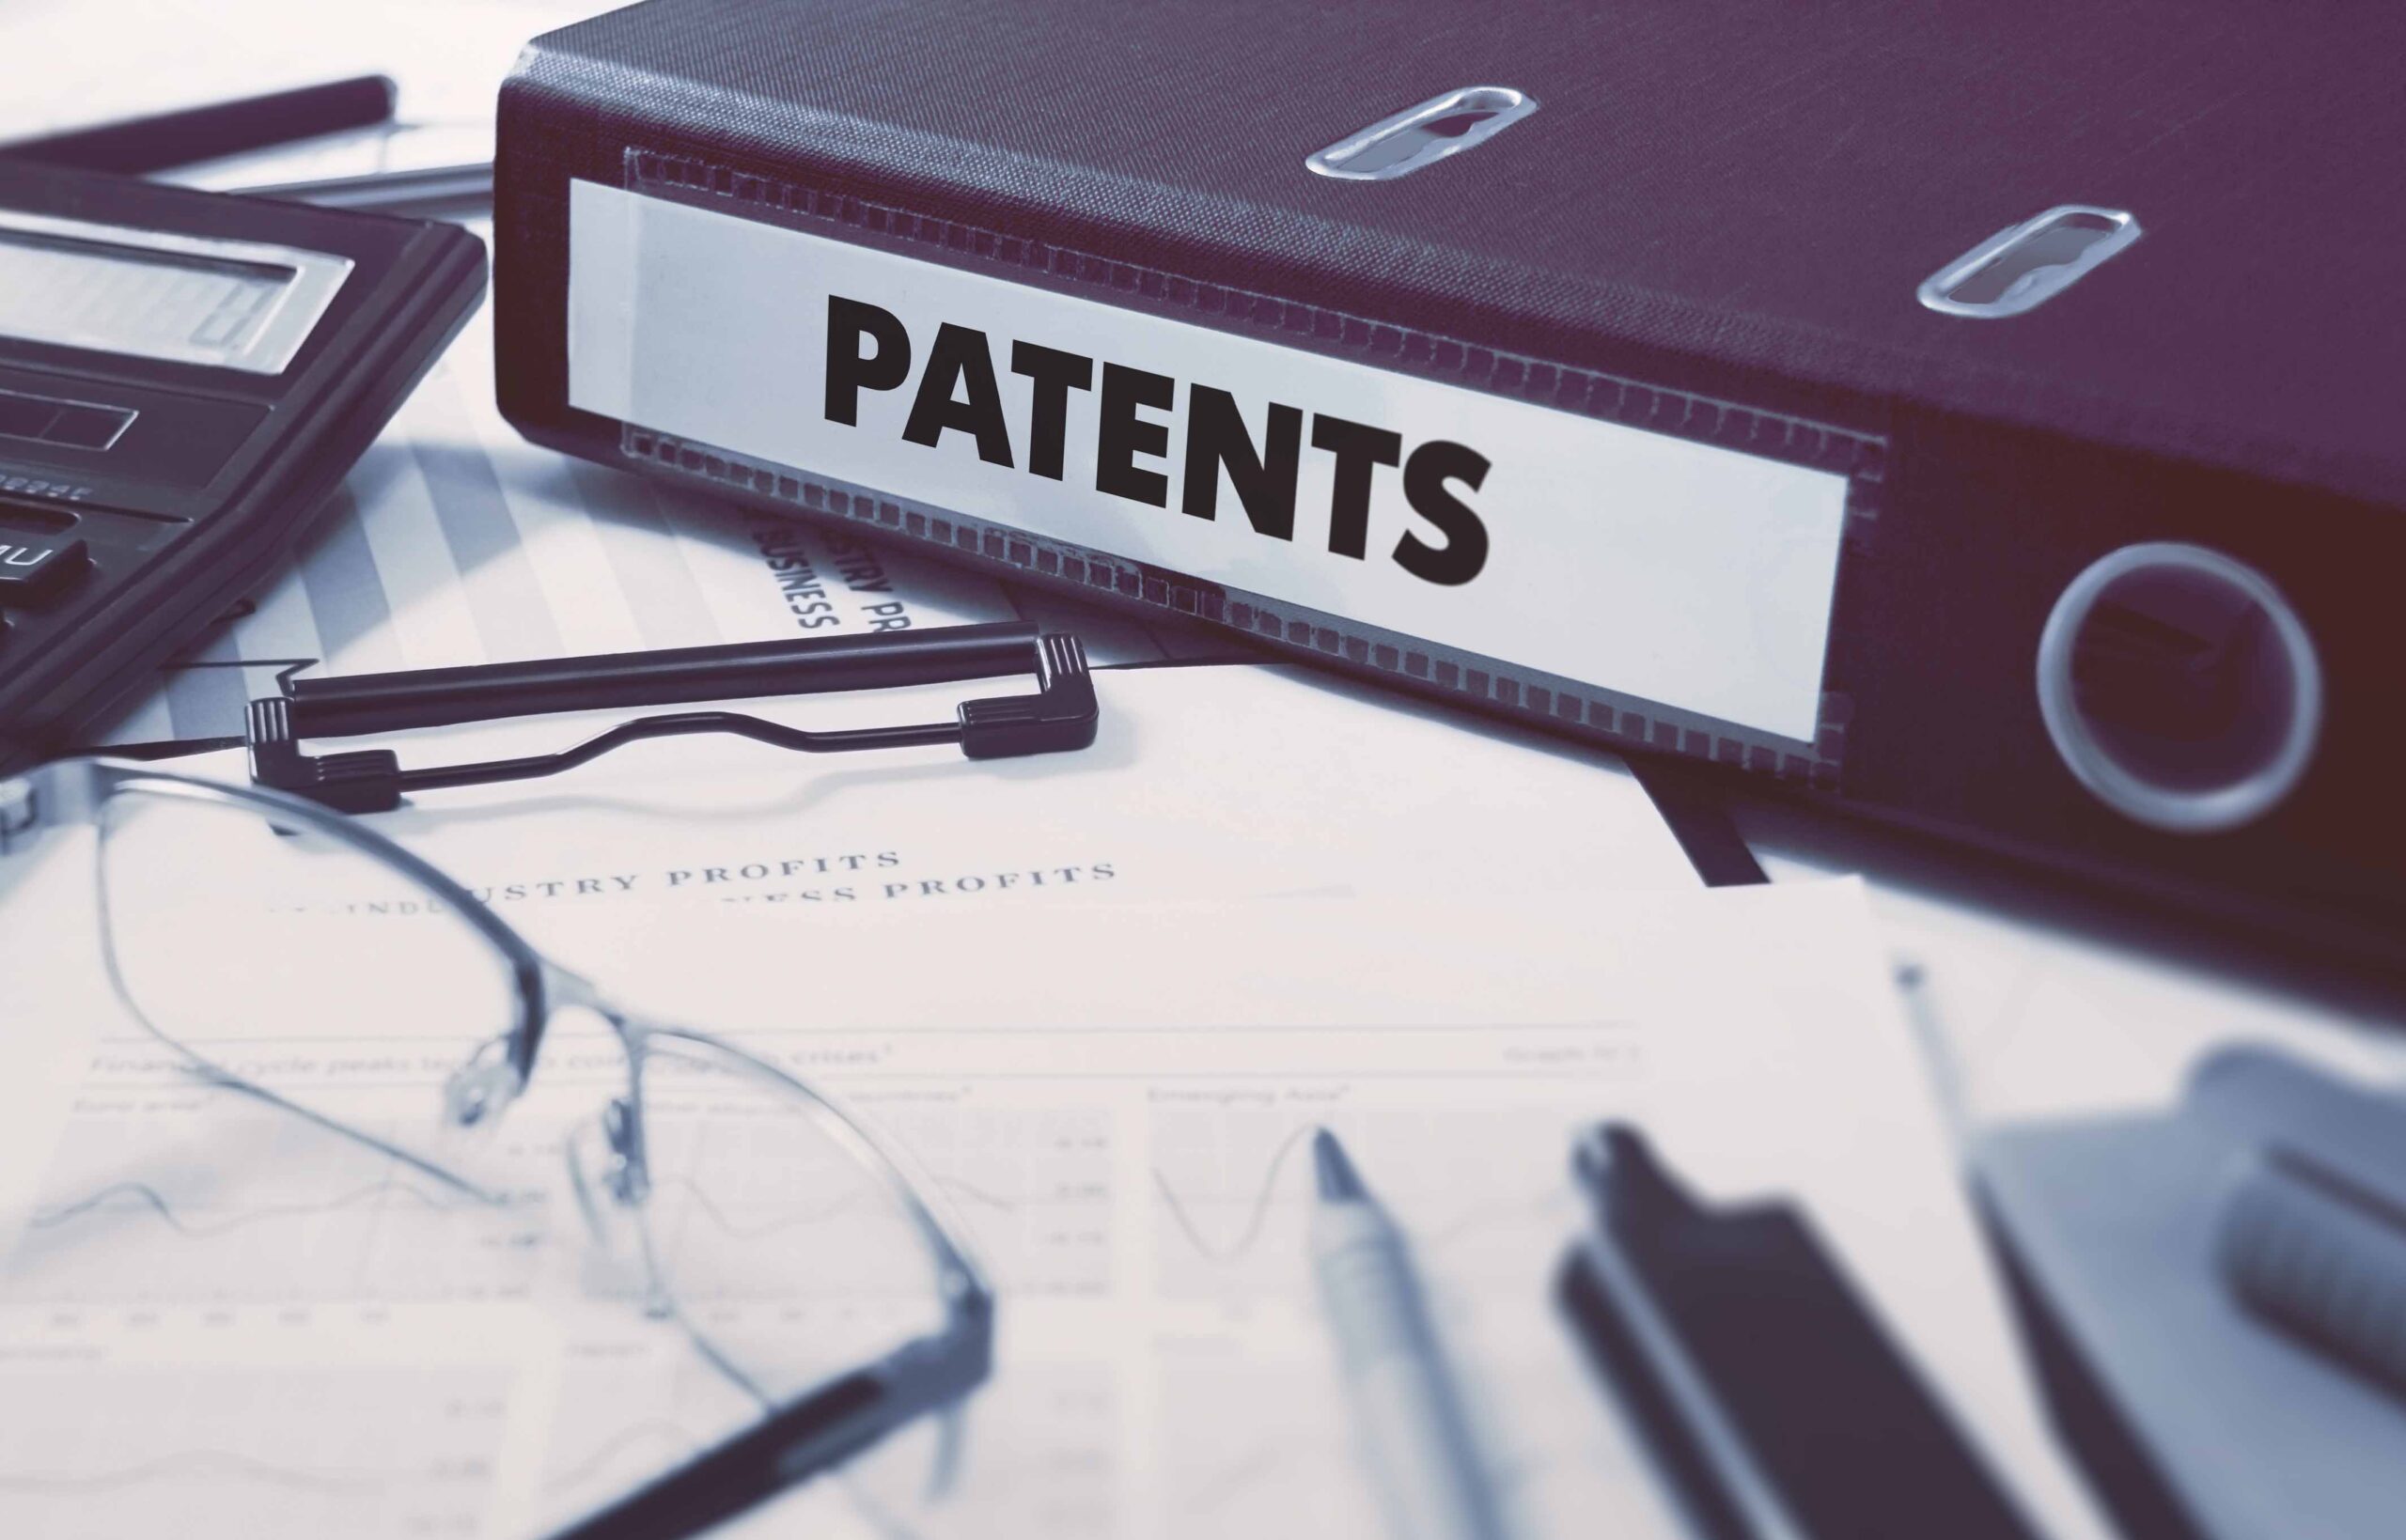 Which of the following is not a part of patent document